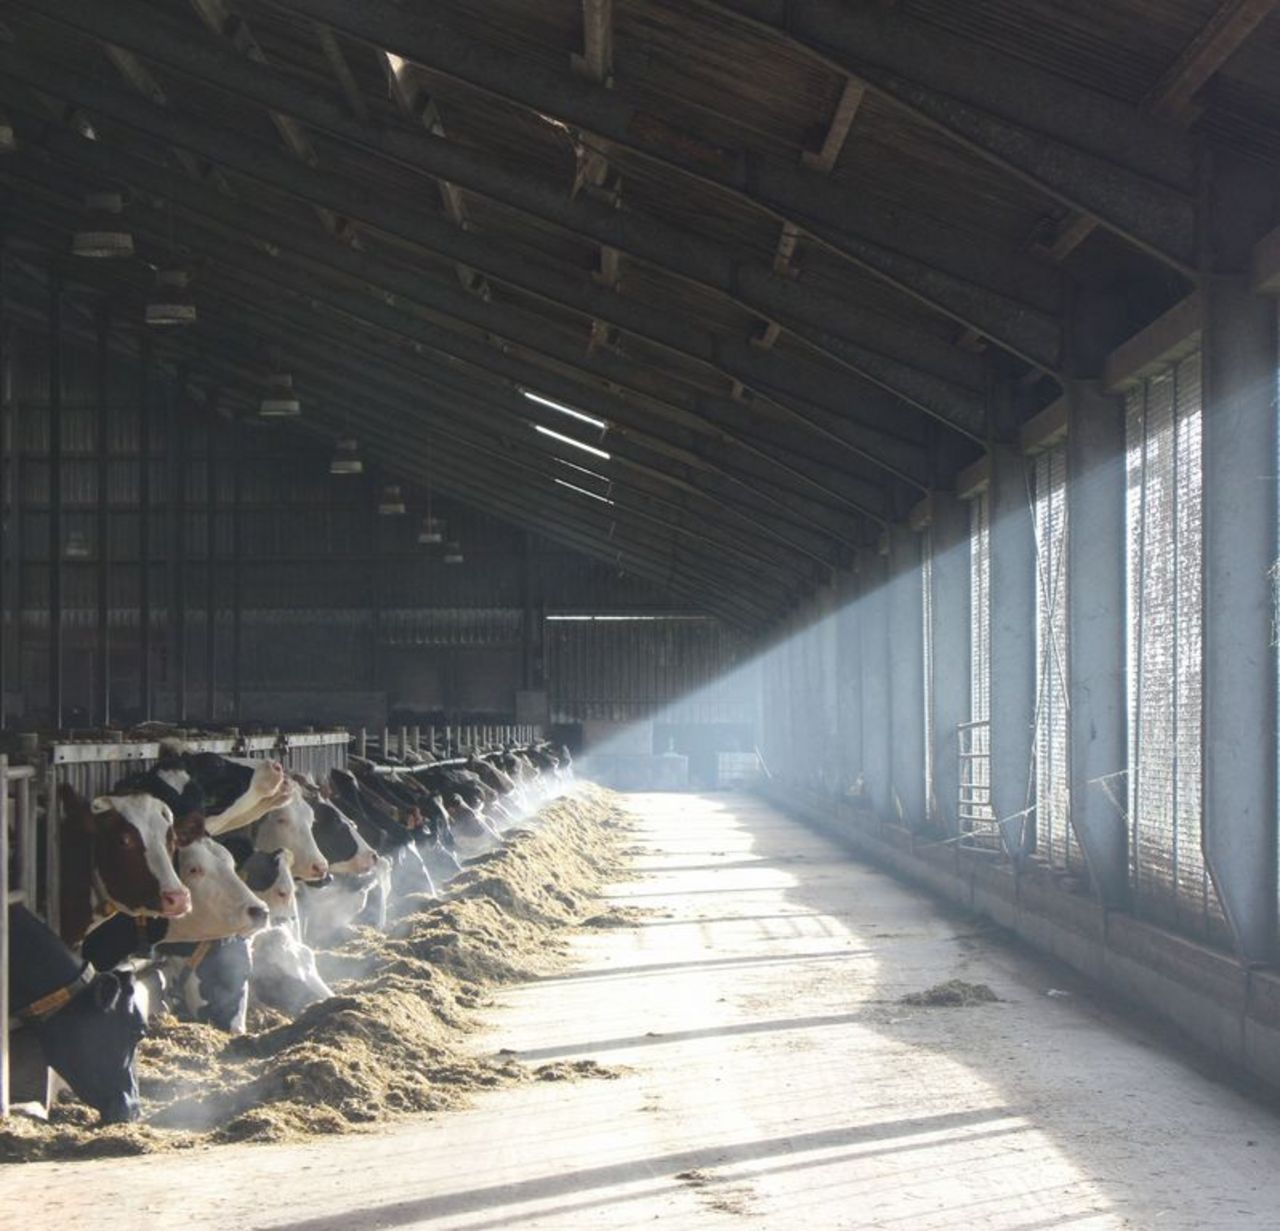 View into a naturally ventilated cattle stable